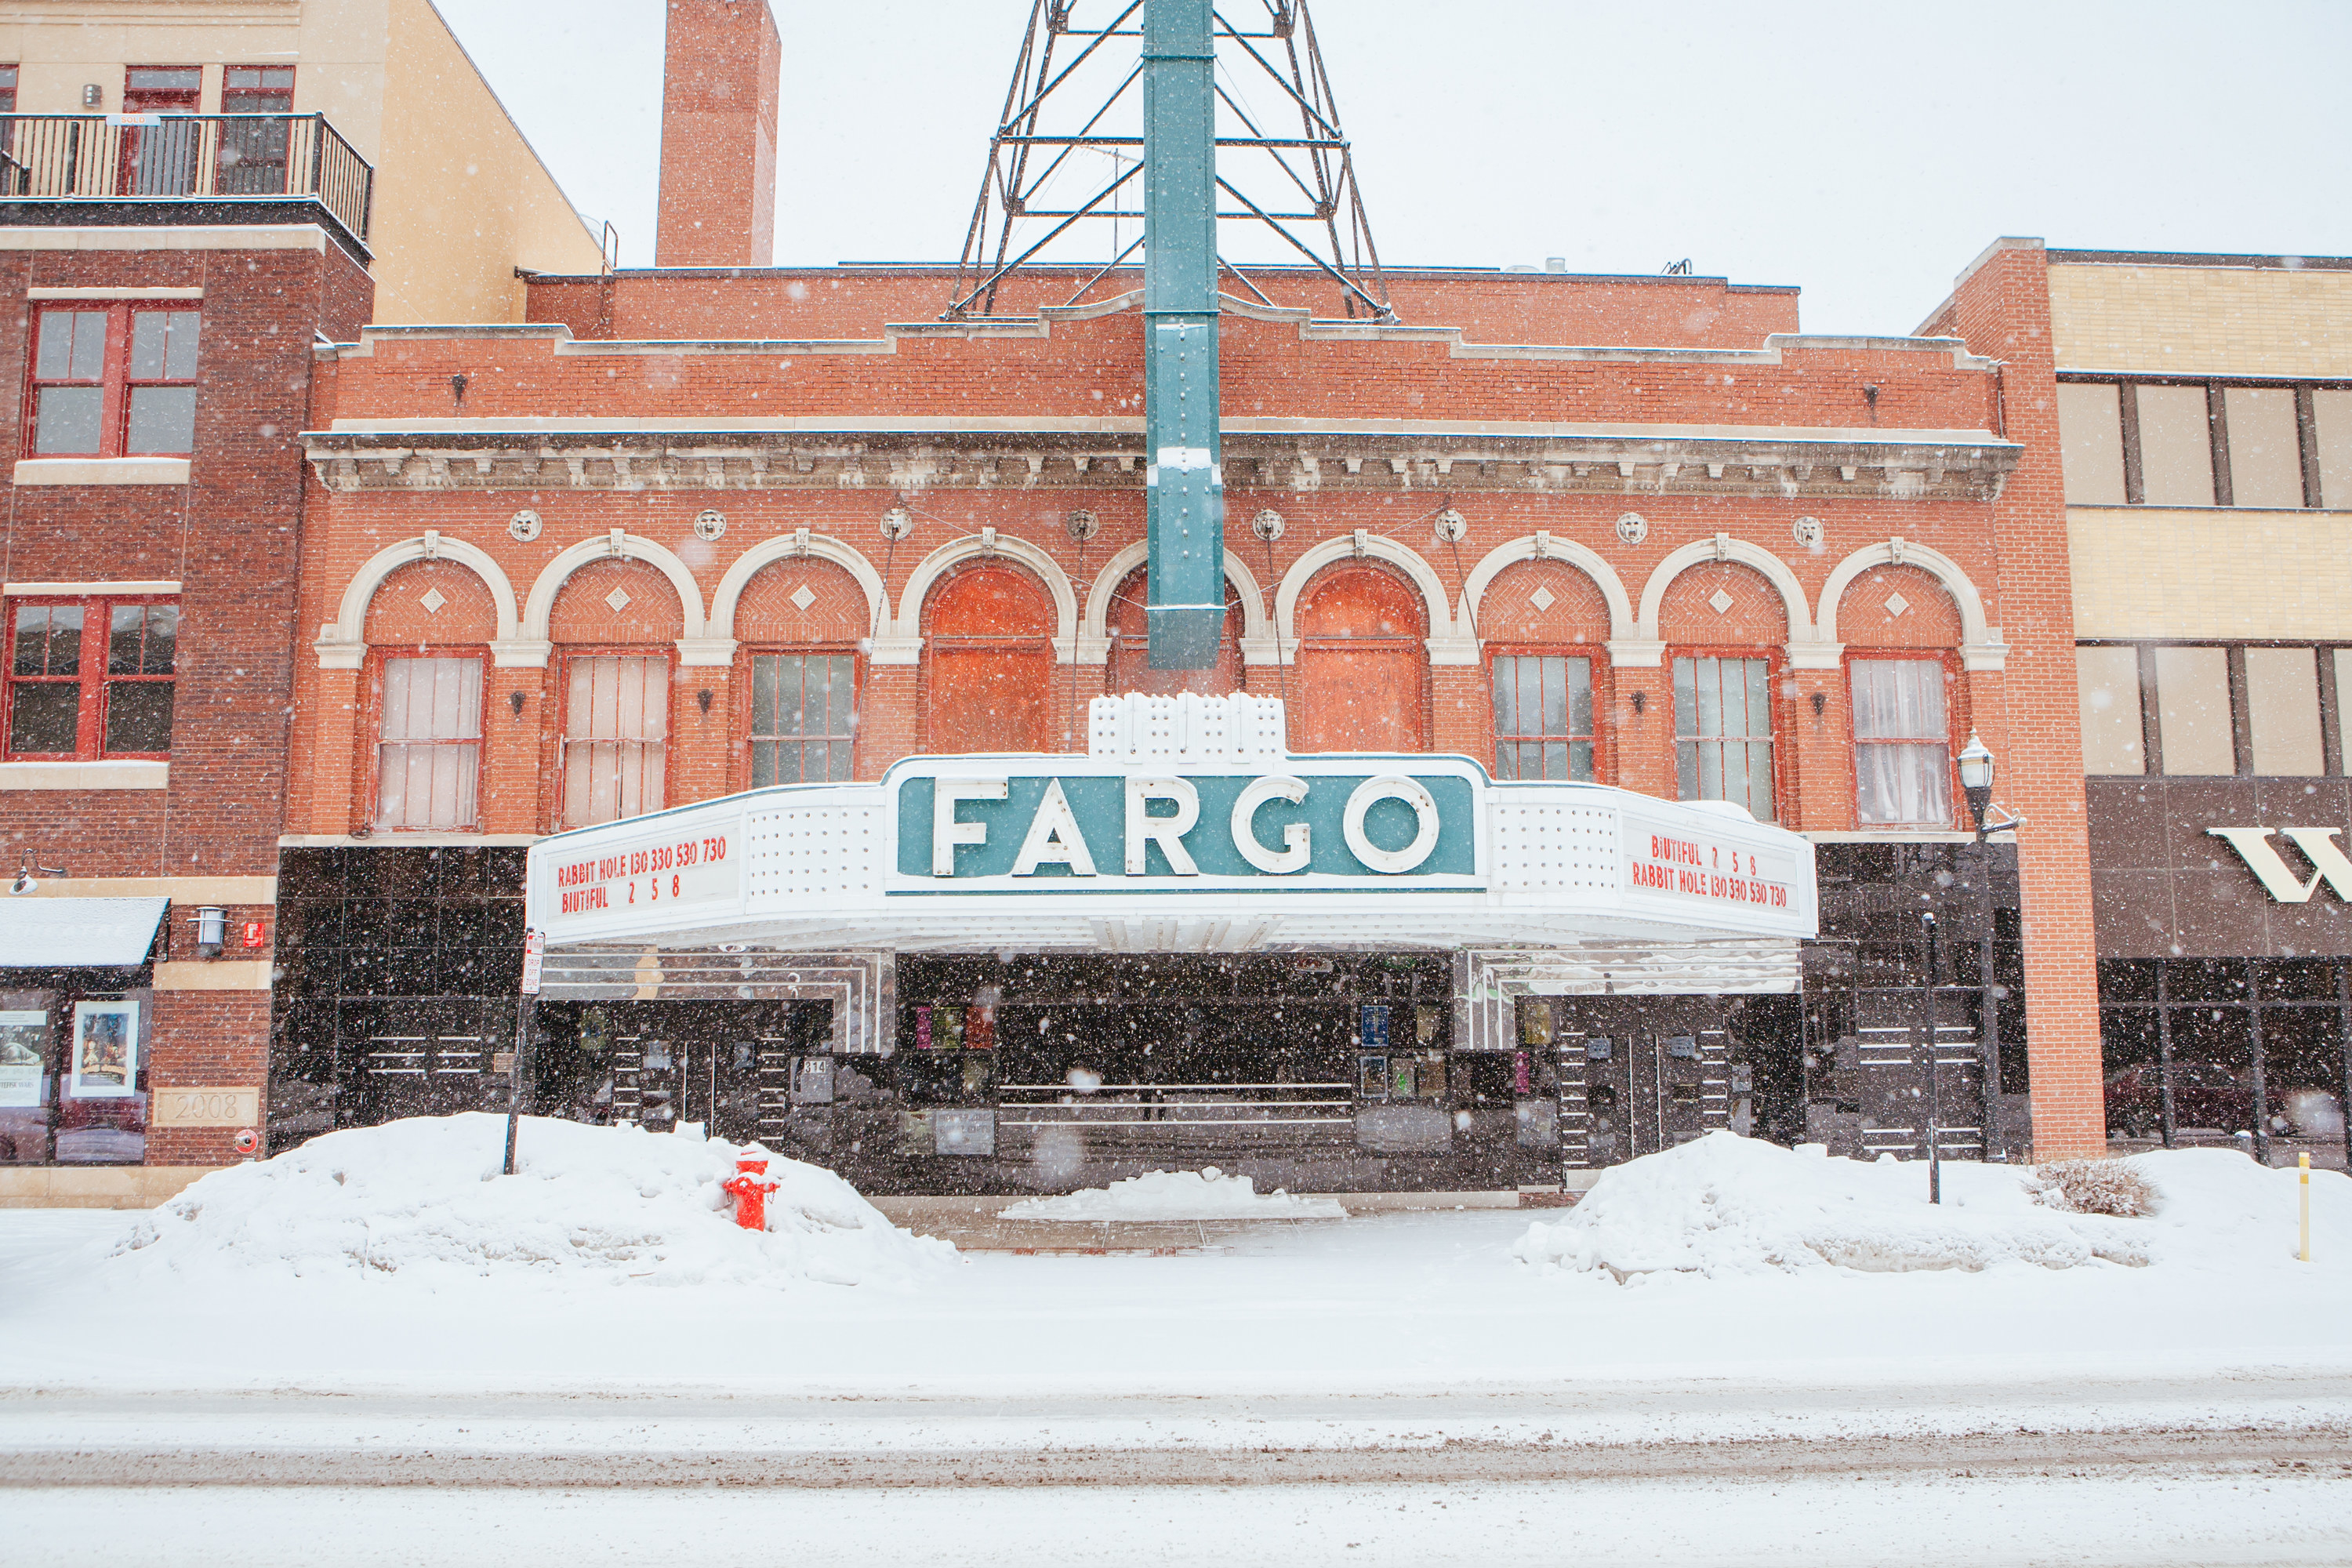 Fargo theater during a snow storm